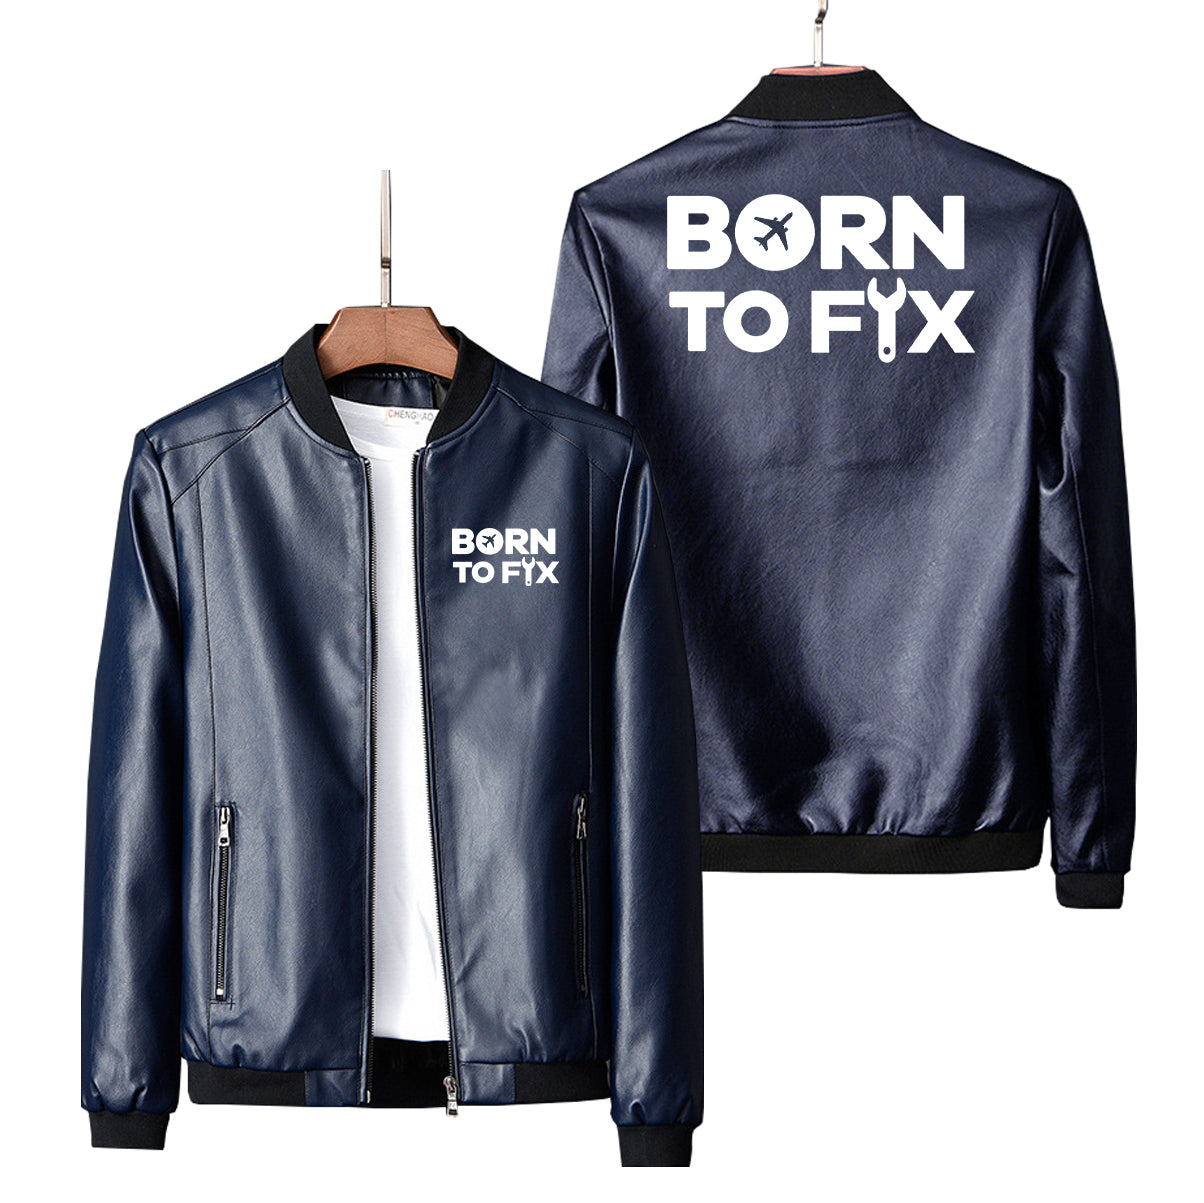 Born To Fix Airplanes Designed PU Leather Jackets